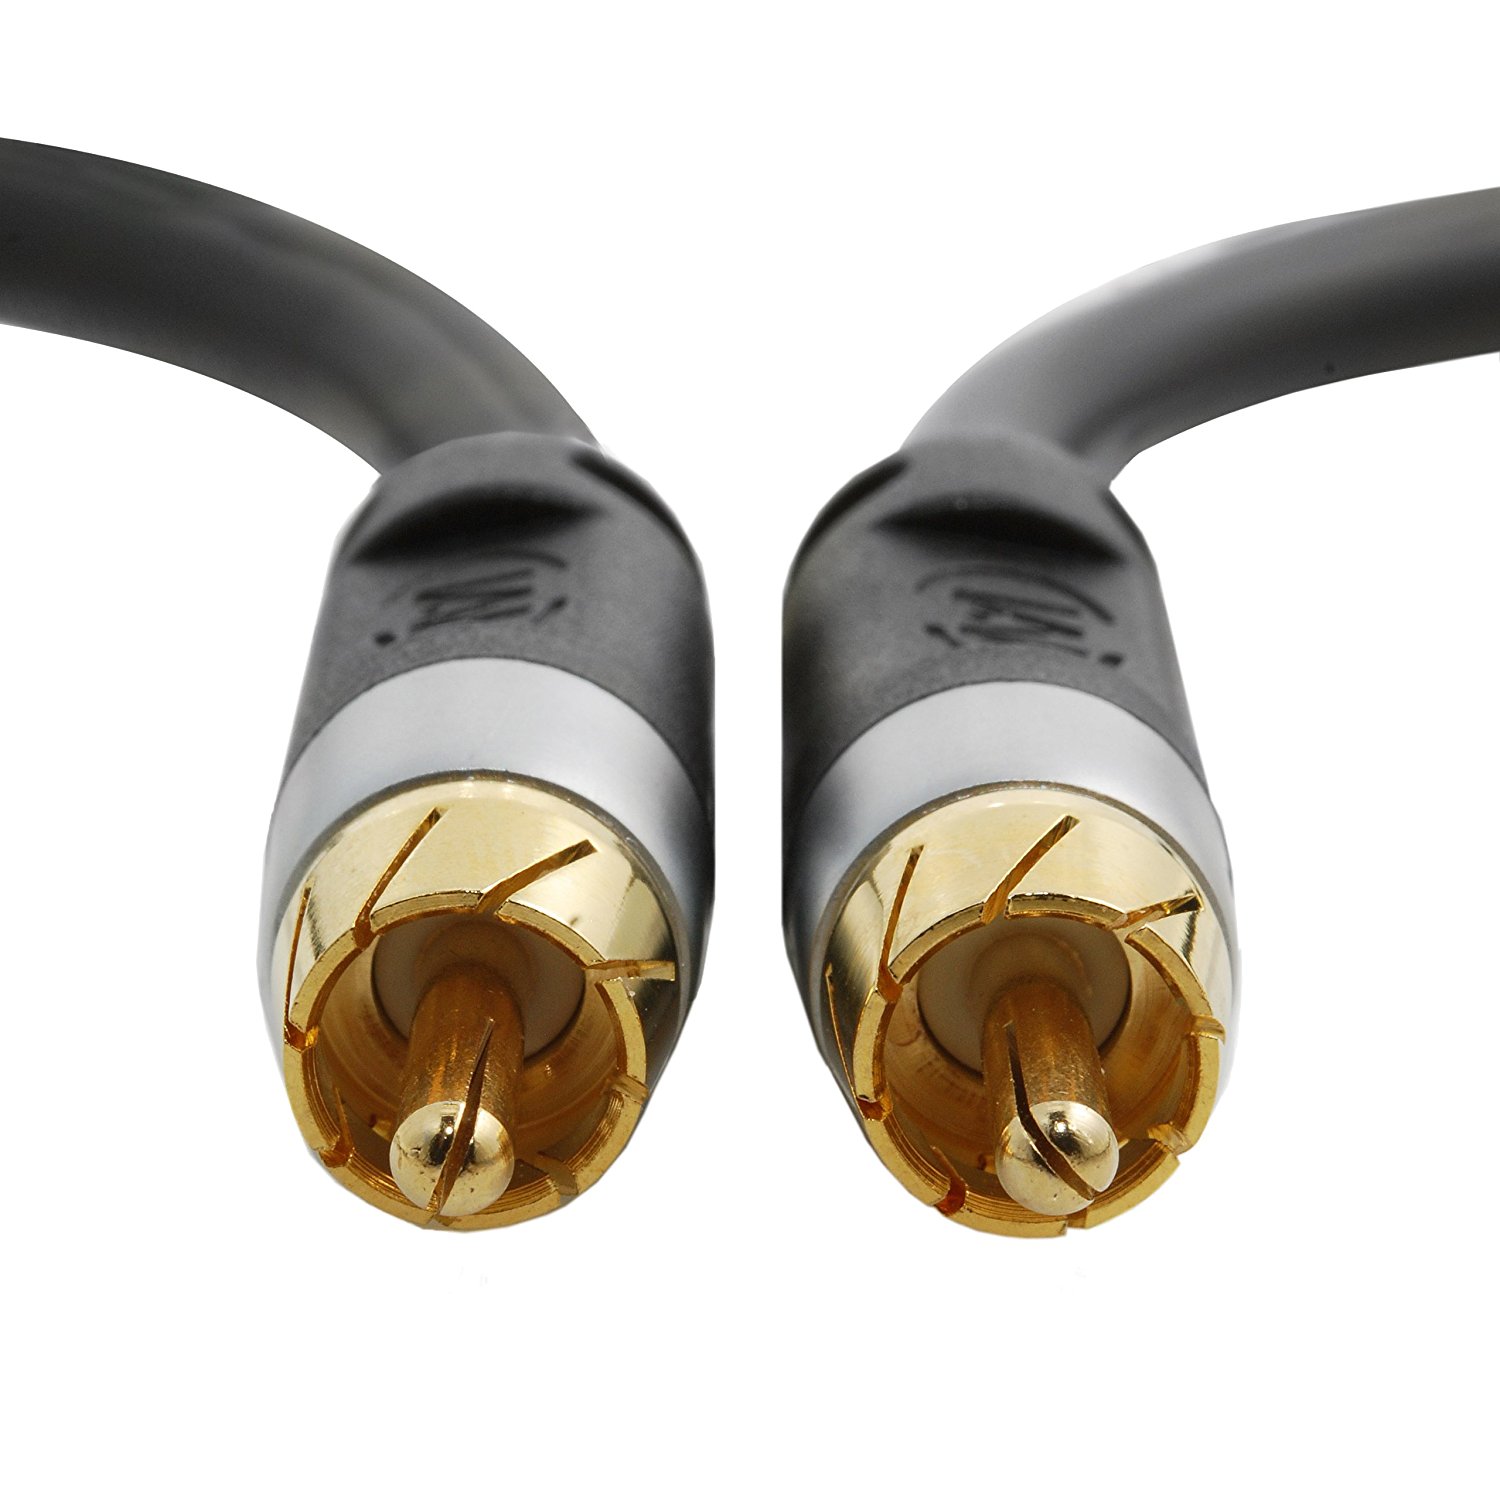 Mediabridge ULTRA Series Digital Audio Coaxial Cable (8 Feet) - Dual Shielded with RCA to RCA Gold-Plated Connectors - Black - (Part# CJ08-6BR-G2 ) - image 3 of 4